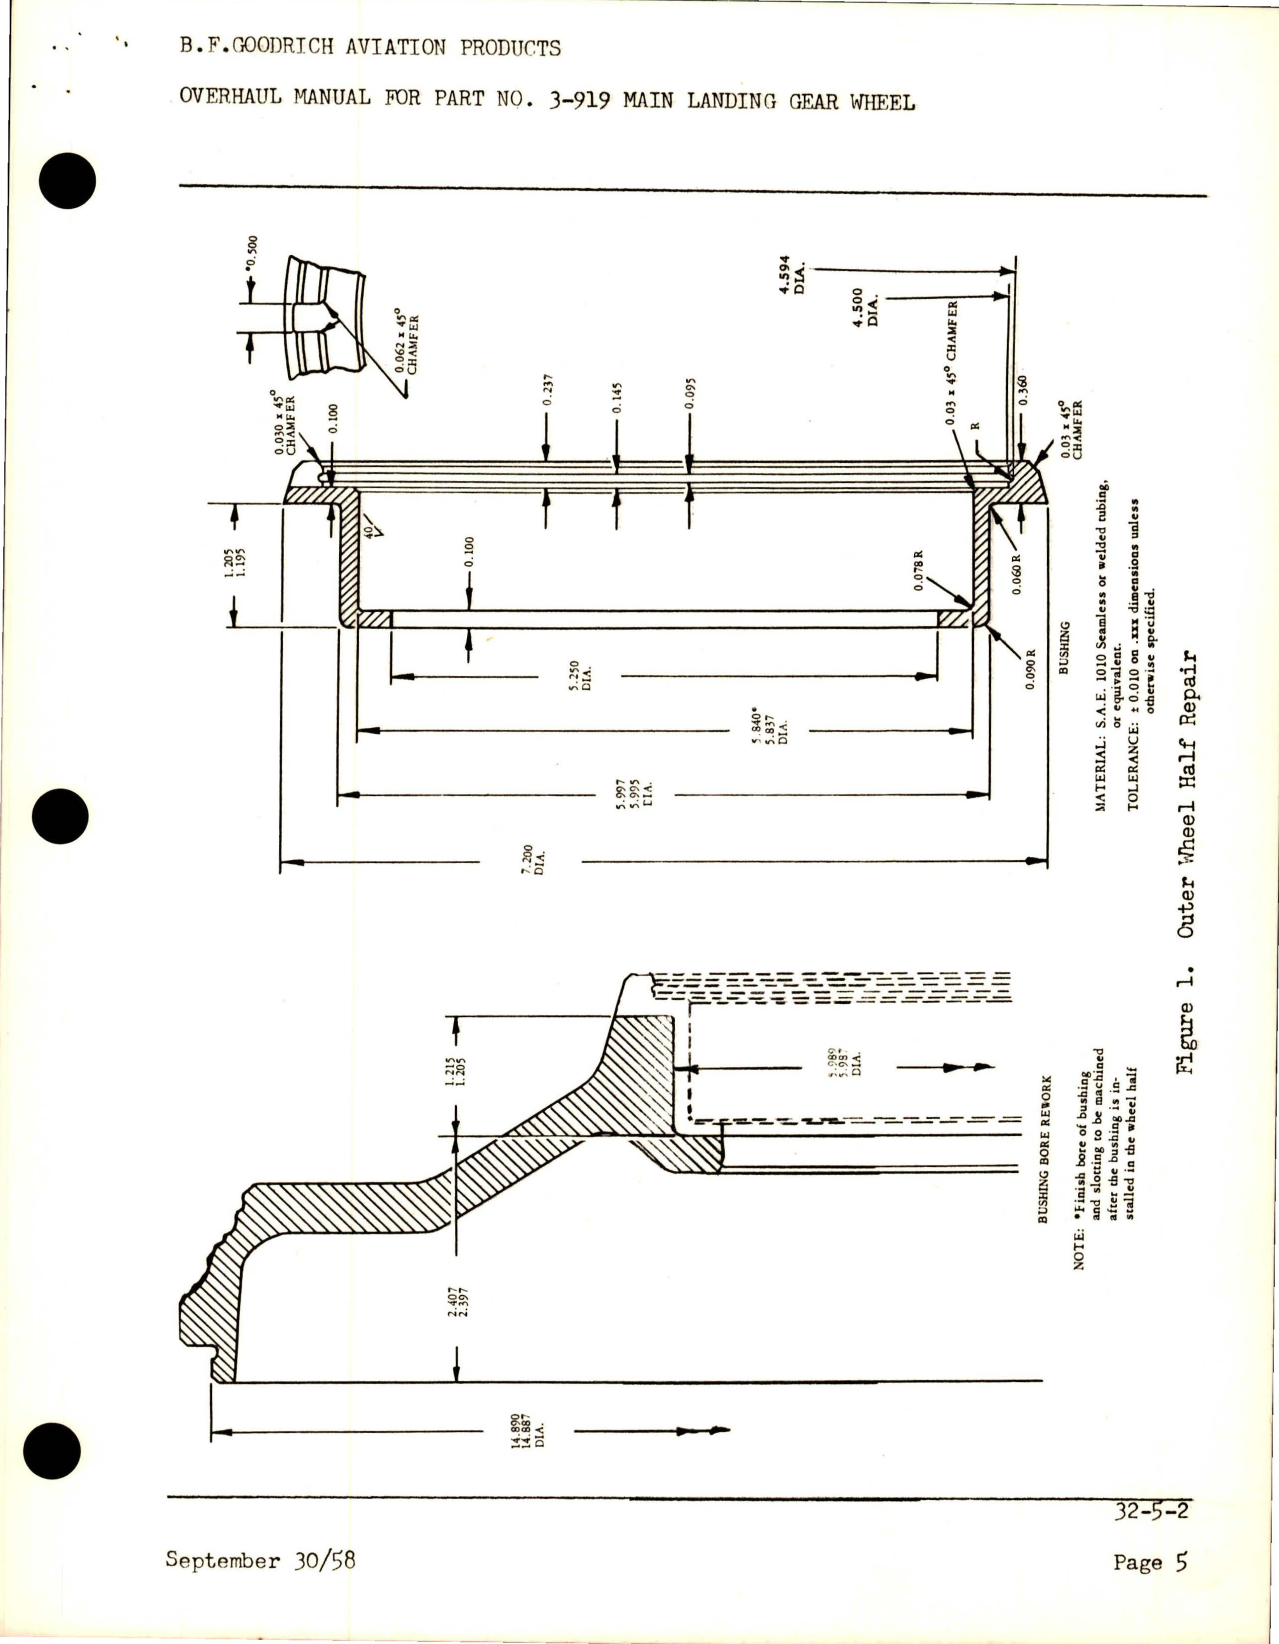 Sample page 5 from AirCorps Library document: Overhaul Manual for Main Landing Gear Wheel - Part 3-919 